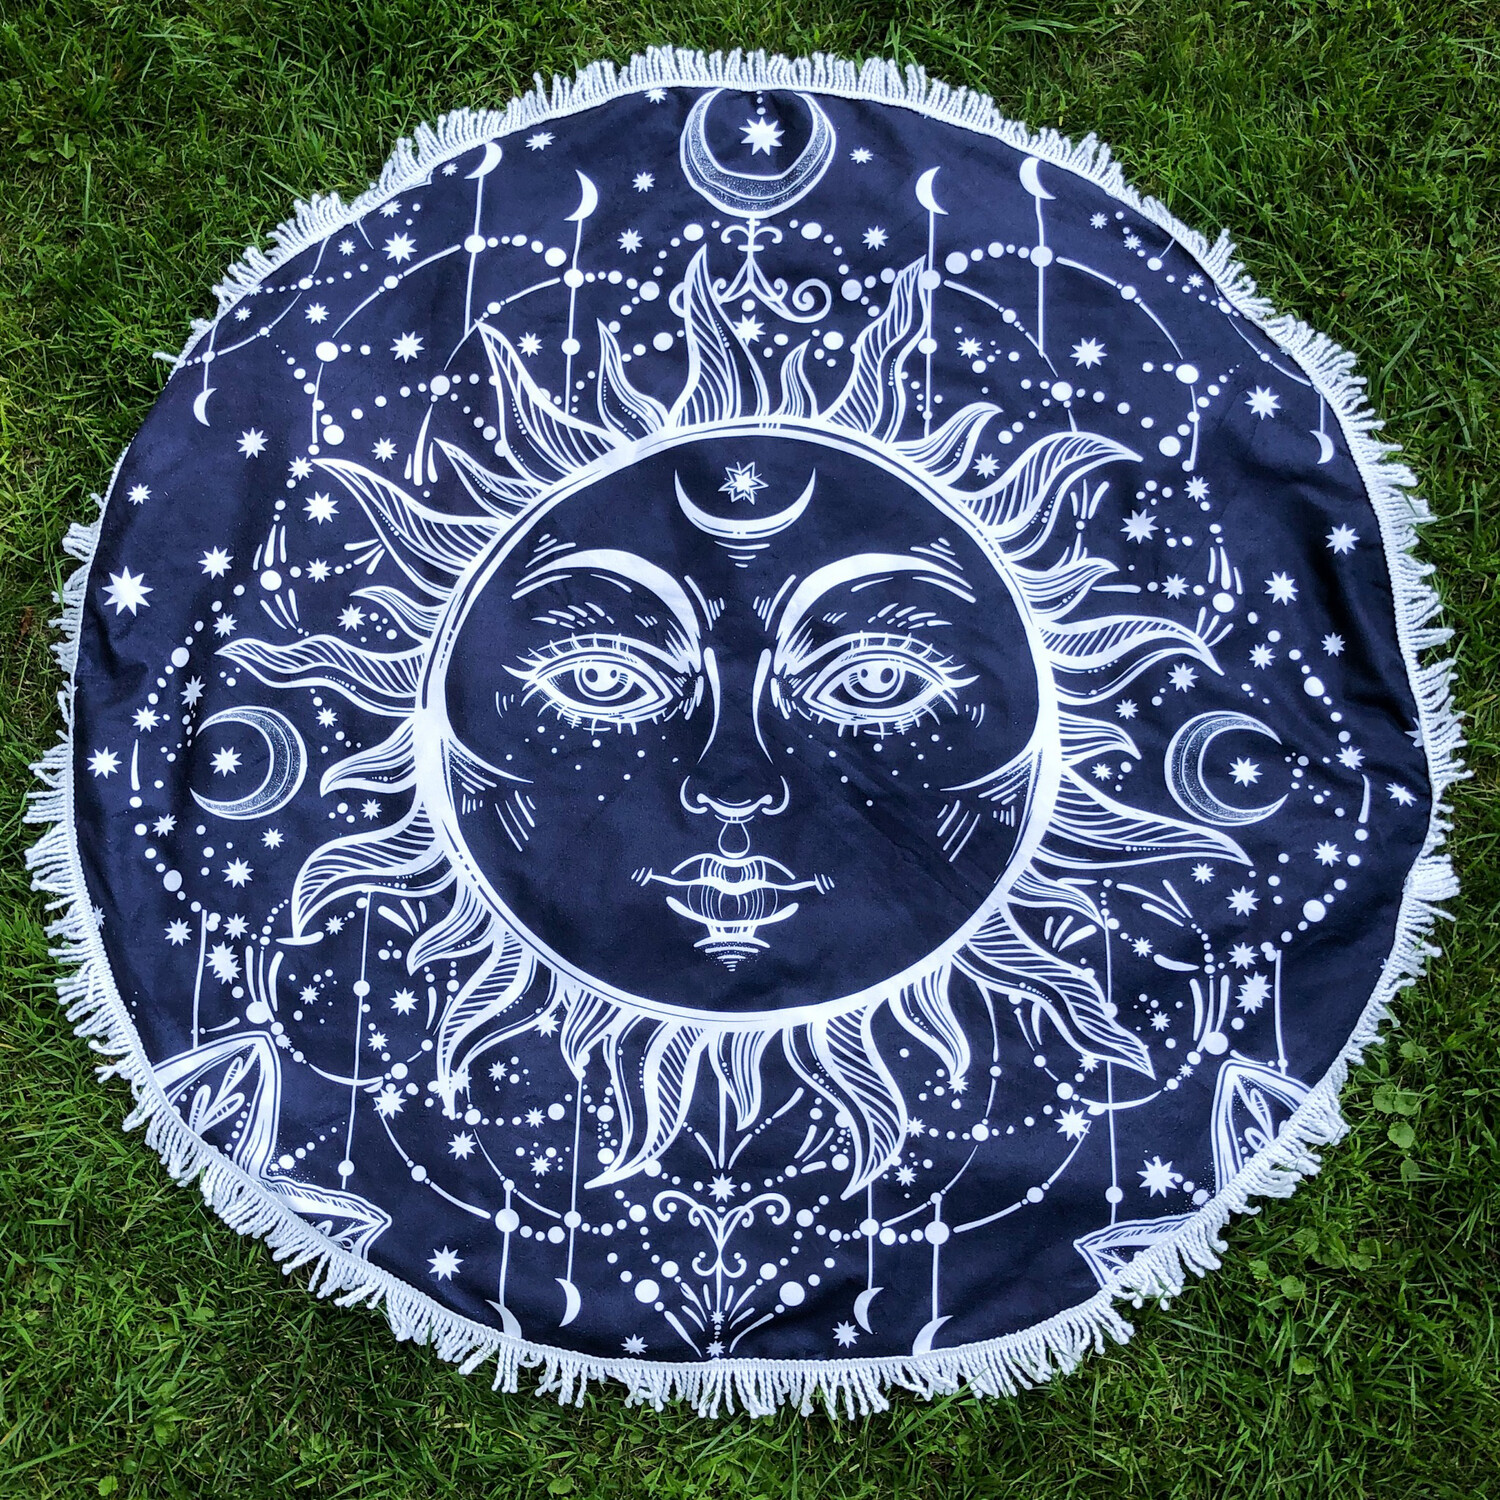 Large Round Printed Beach Towel Blanket: Blue and White Sun With Face